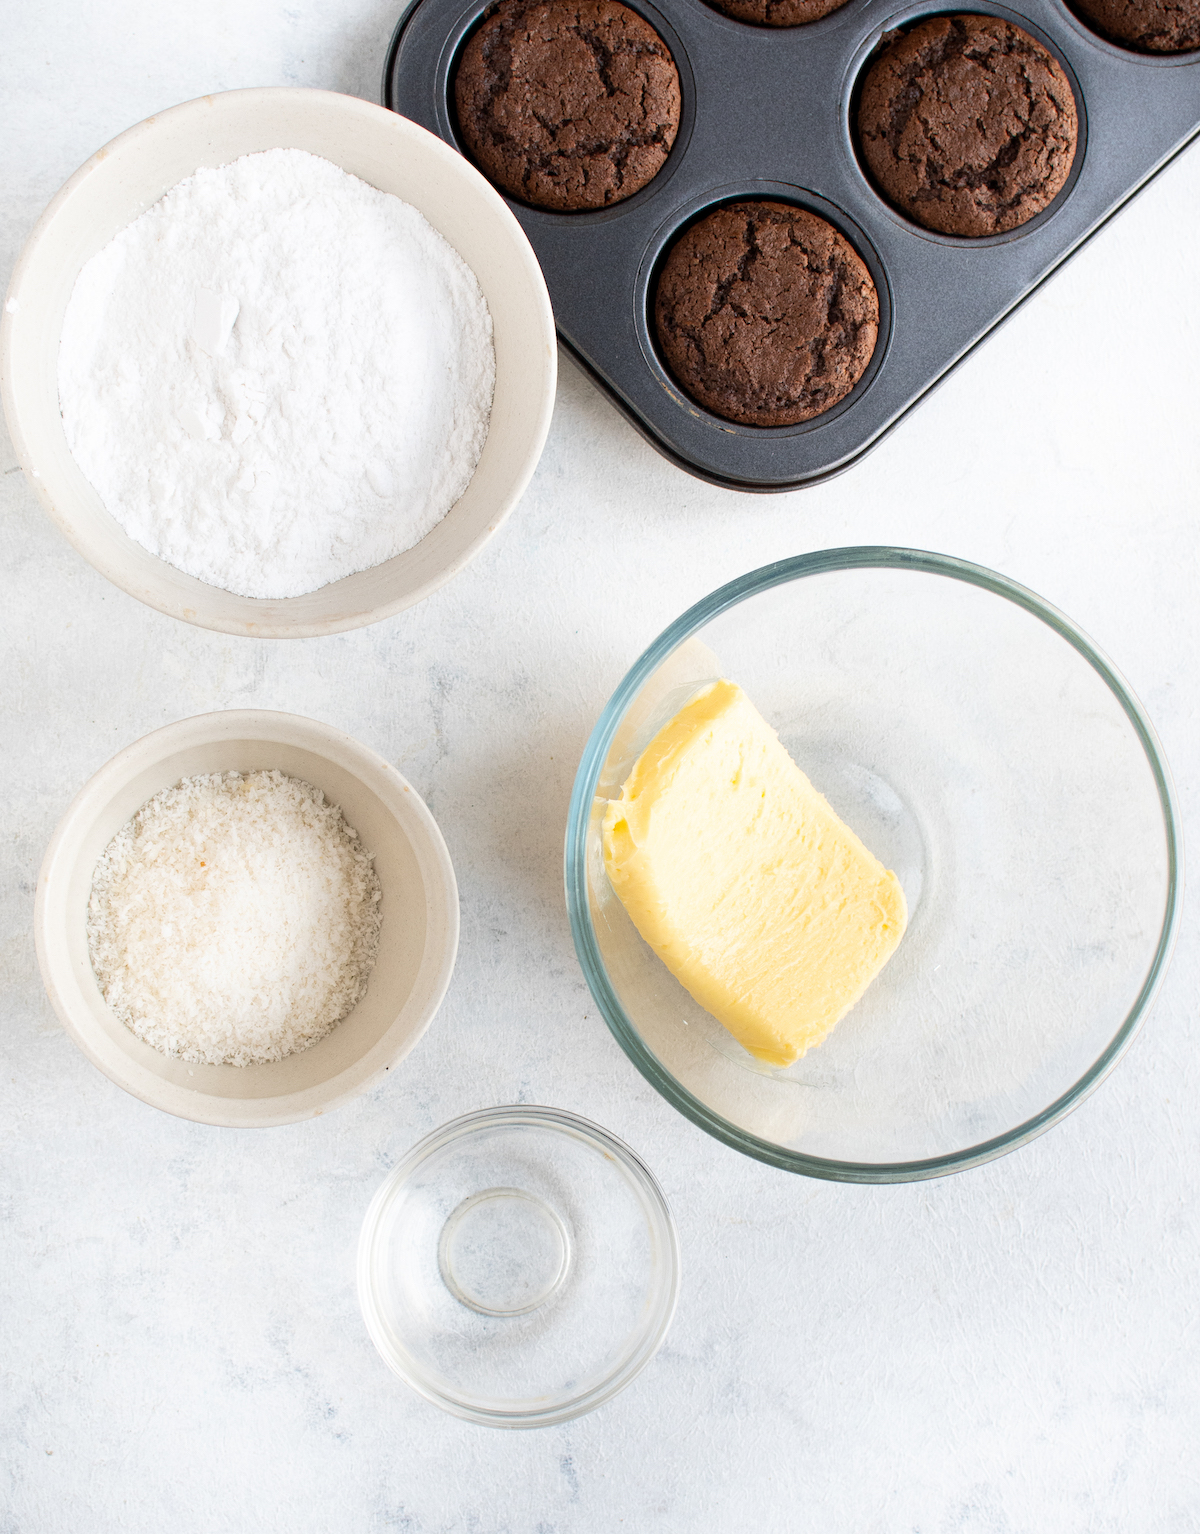 Butter, chocolate cupcakes, coconut, extract, and powdered sugar